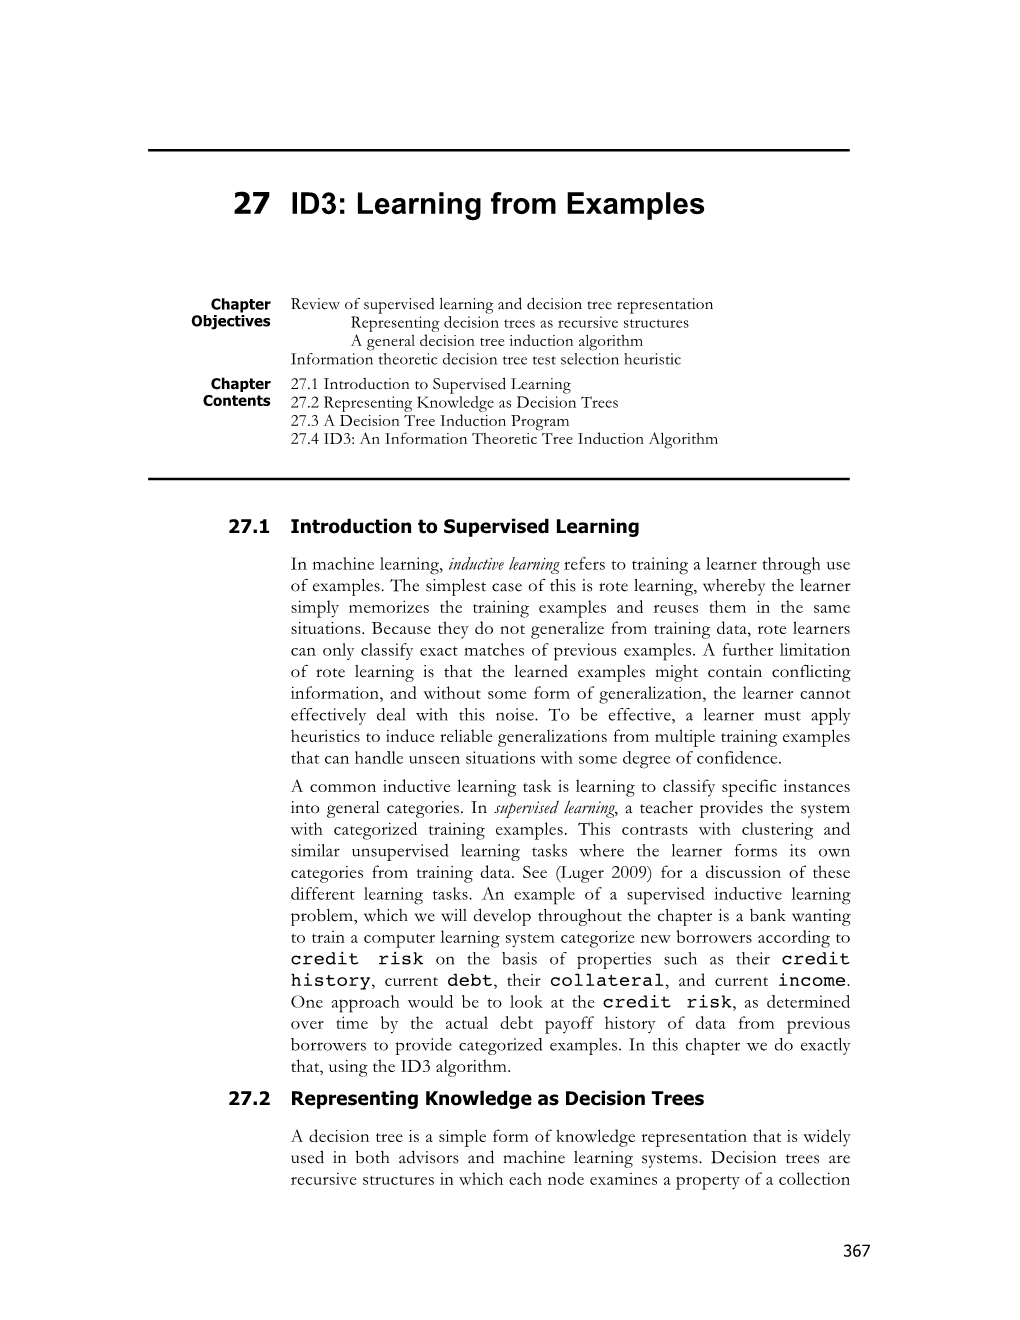 CH 27: ID3: Learning from Examples